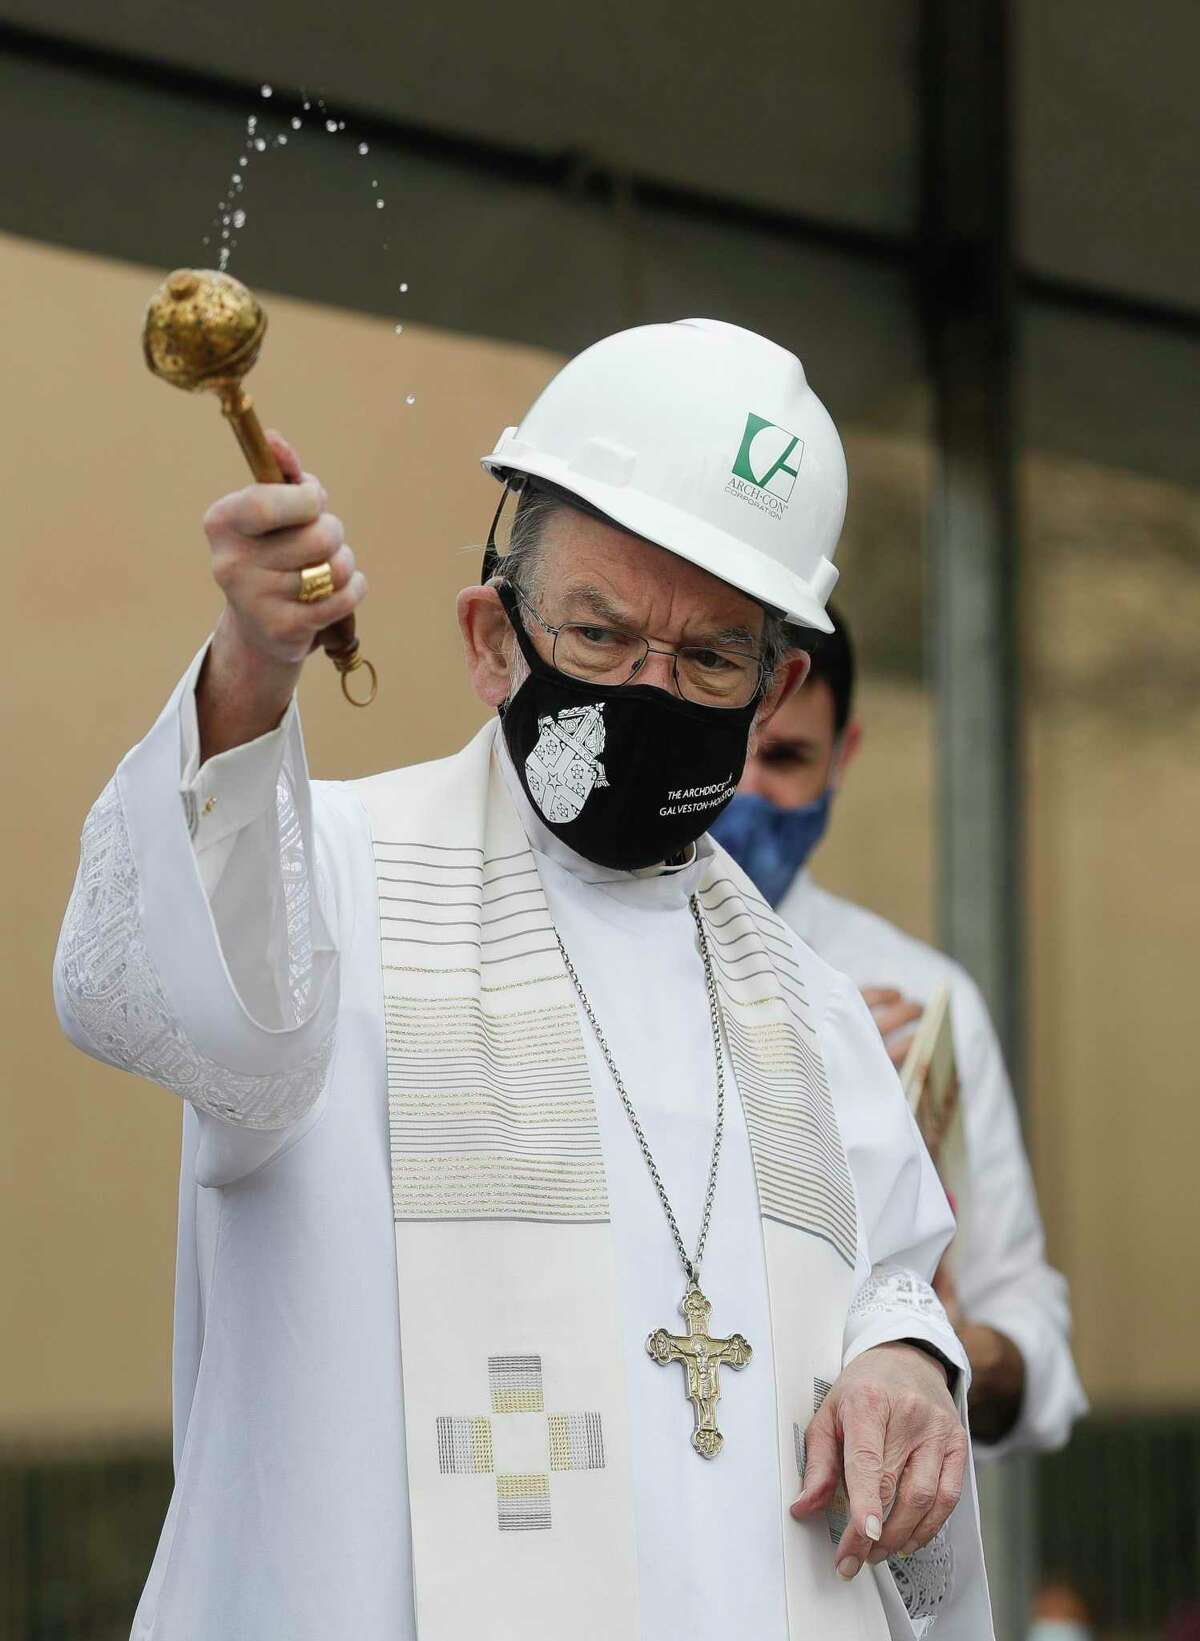 Bishop George Sheltz, former pastor at St. Anthony of Padua Catholic Church, spreads holy water on the future site of the Our Lady of Angels chapel, Saturday, Feb. 6, 2021, in The Woodlands.